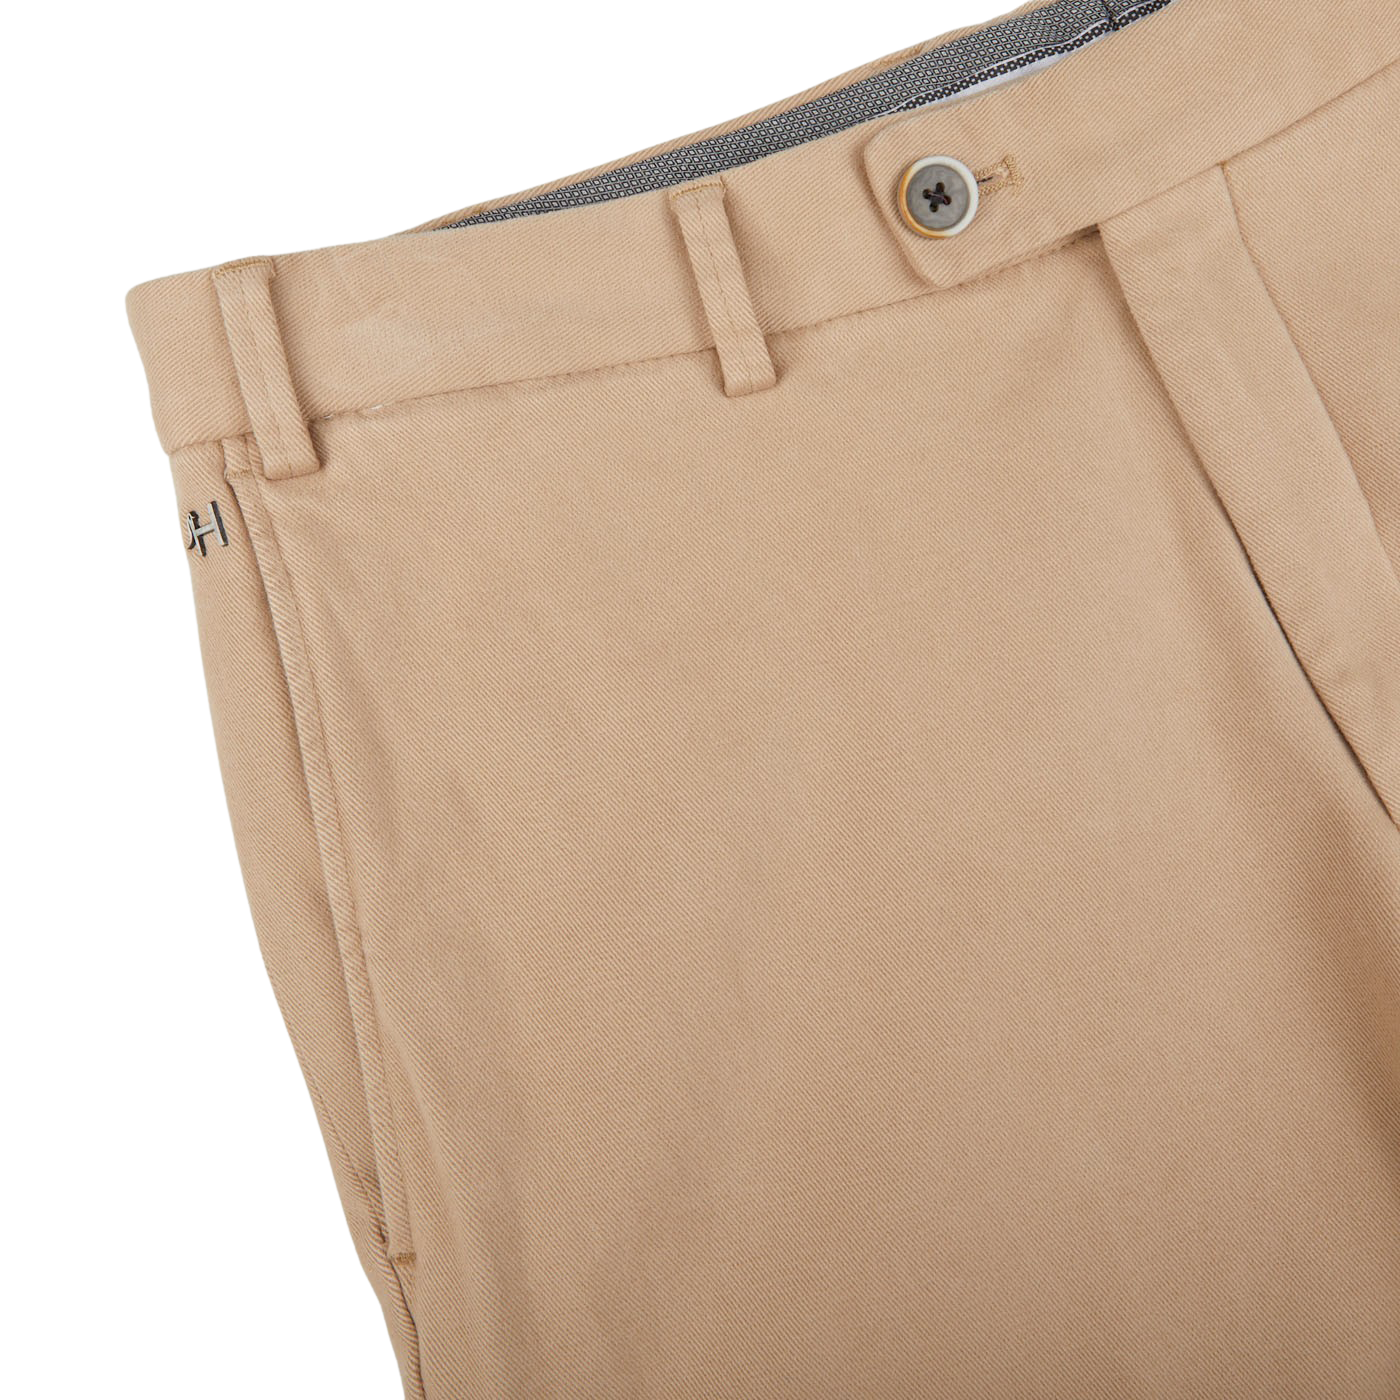 The Light Beige Cotton Stretch Regular Fit Chinos by Hiltl in cotton twill.